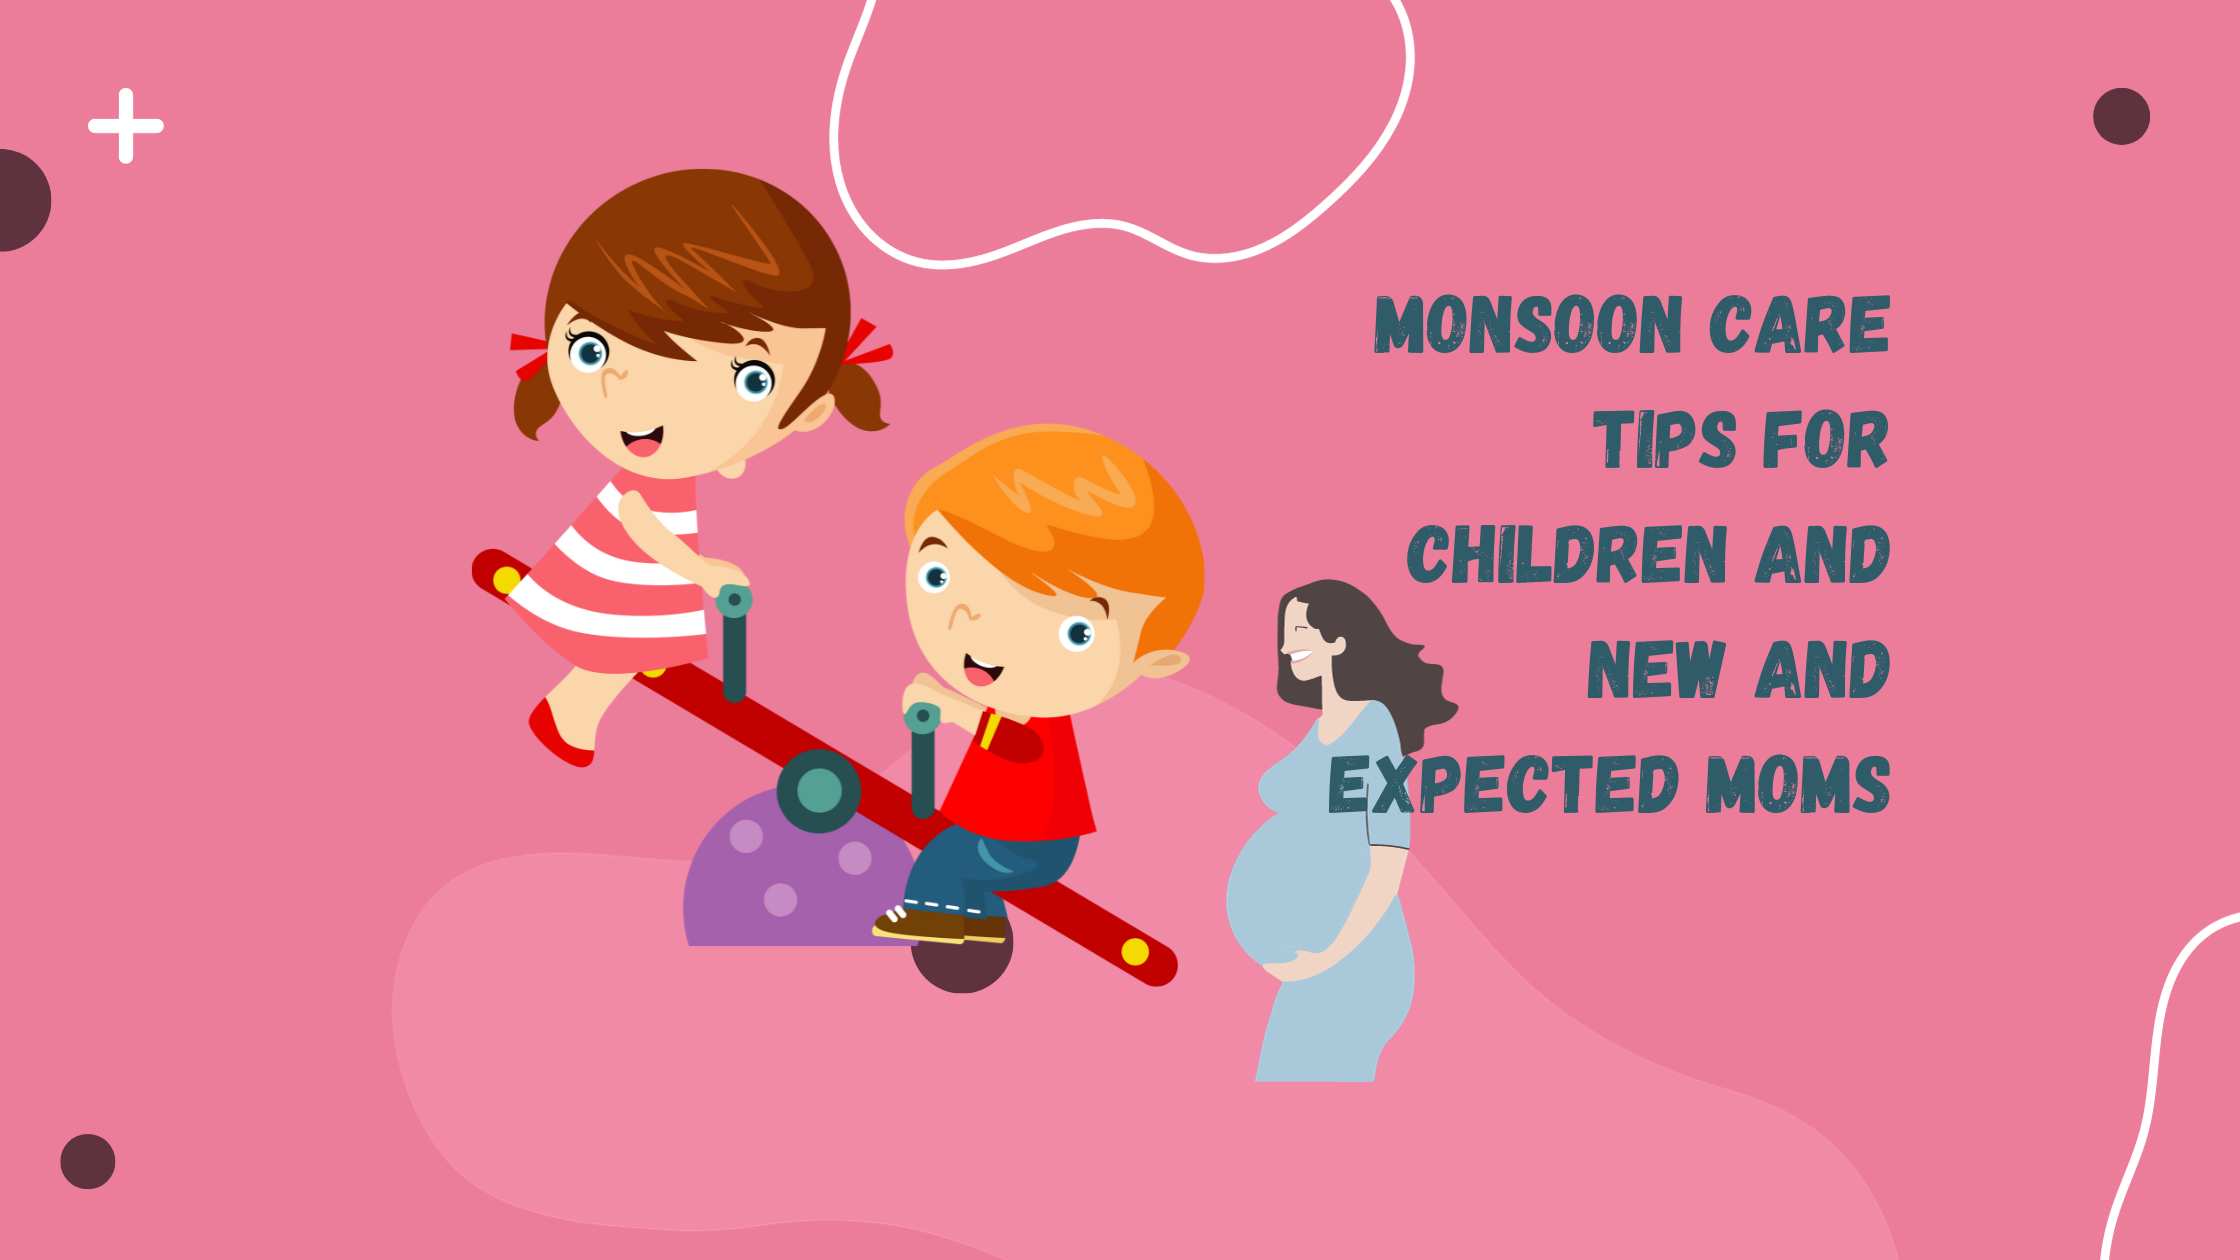 Monsoon Care Tips For Children and New and Expected Moms